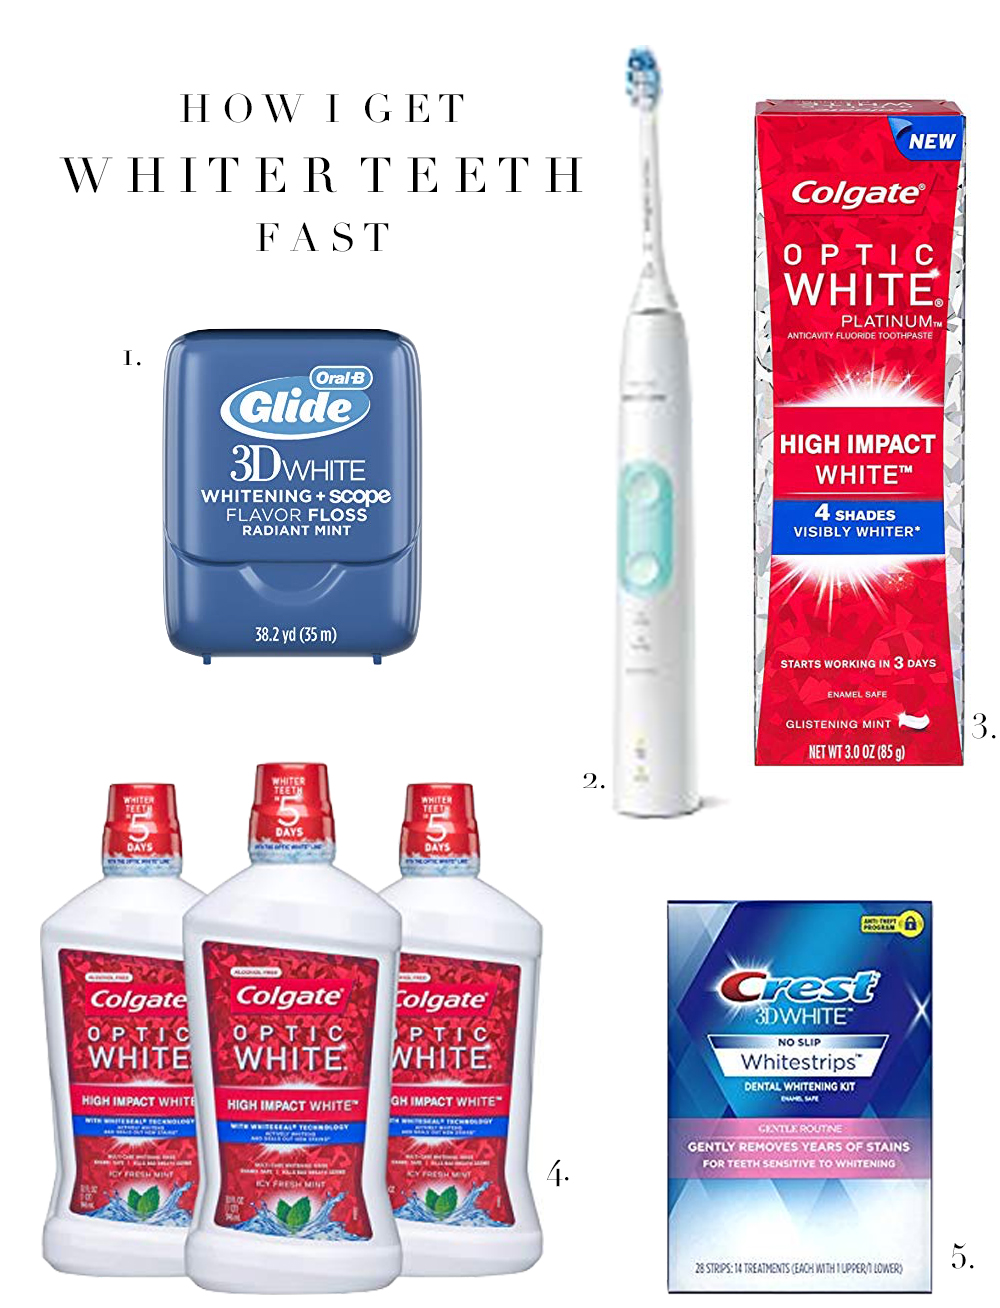 My Teeth Whitening Products